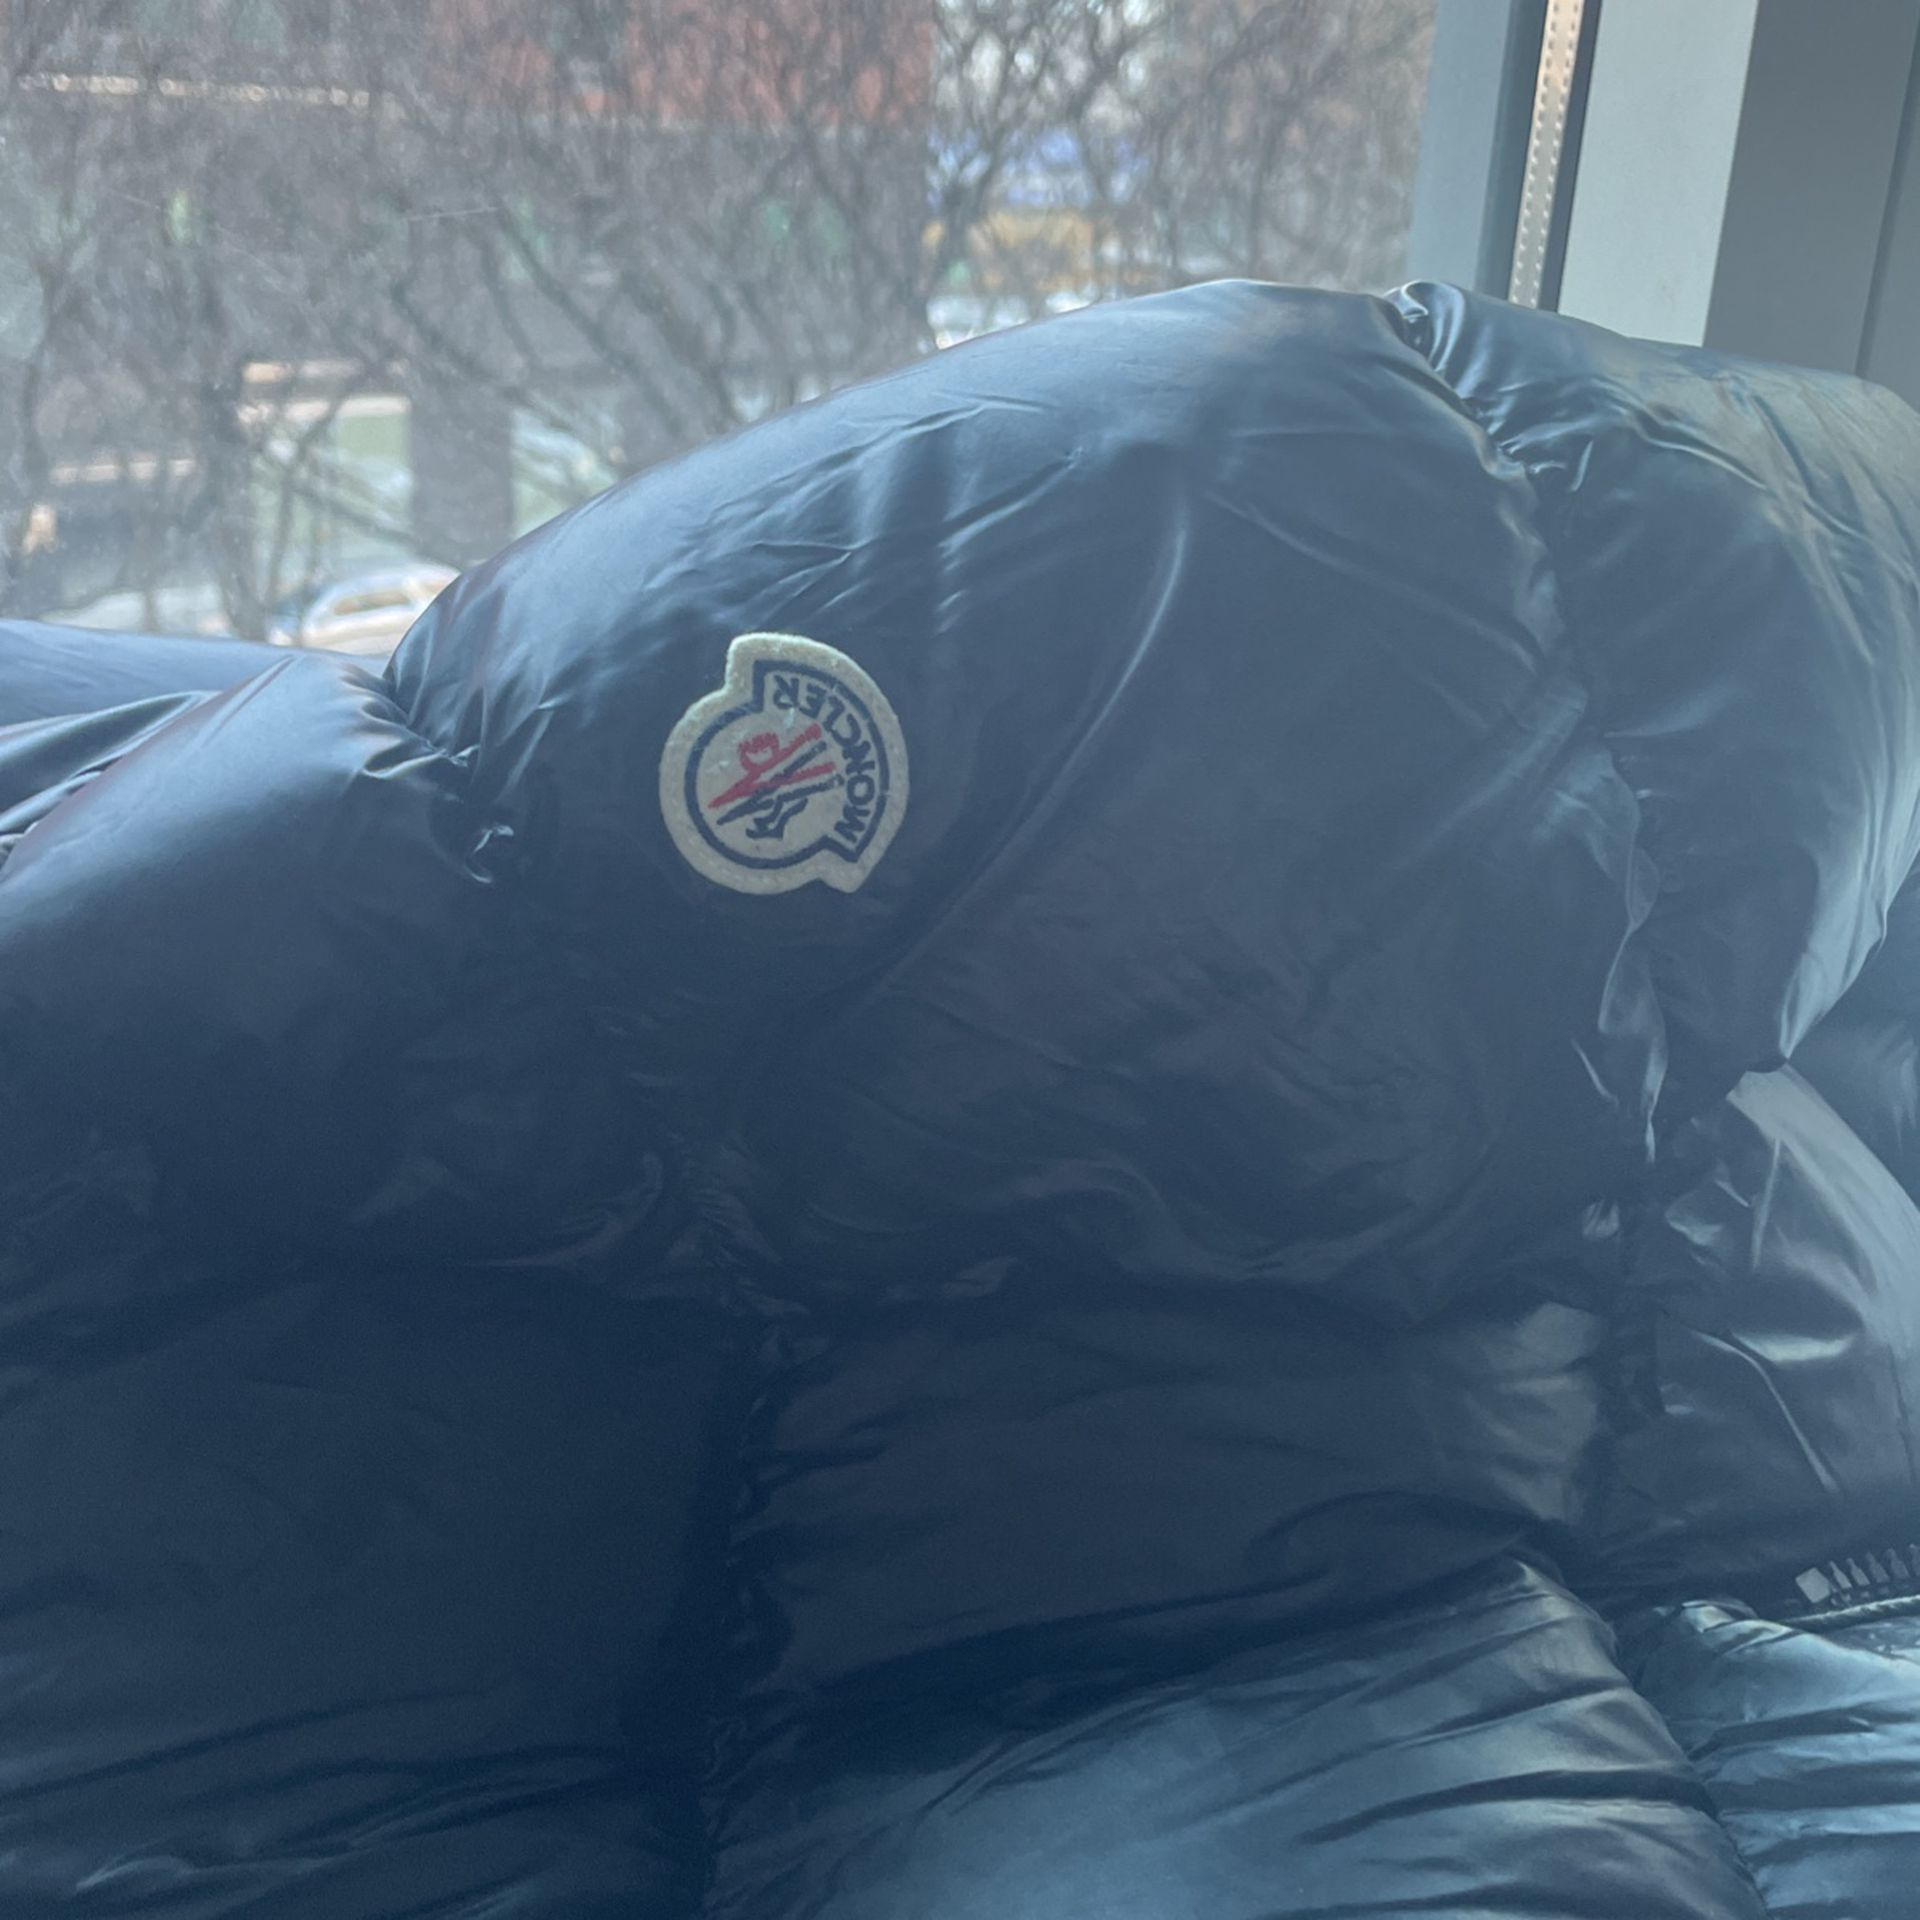 Moncler 1952 Trient Giubbotto for Sale in Queens, NY - OfferUp